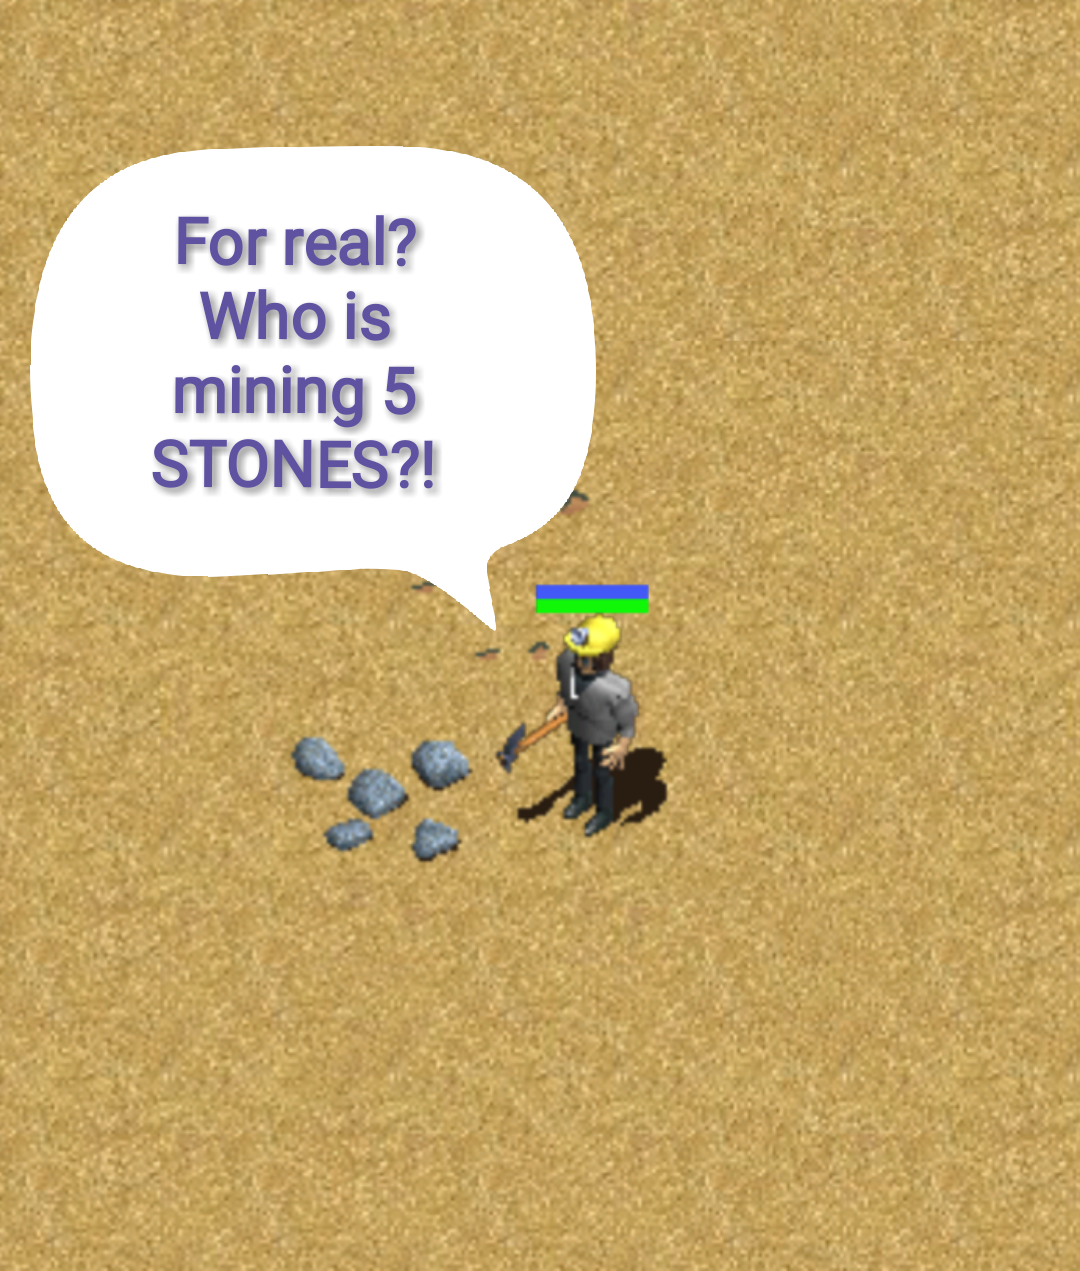 Taking stones from a stone...